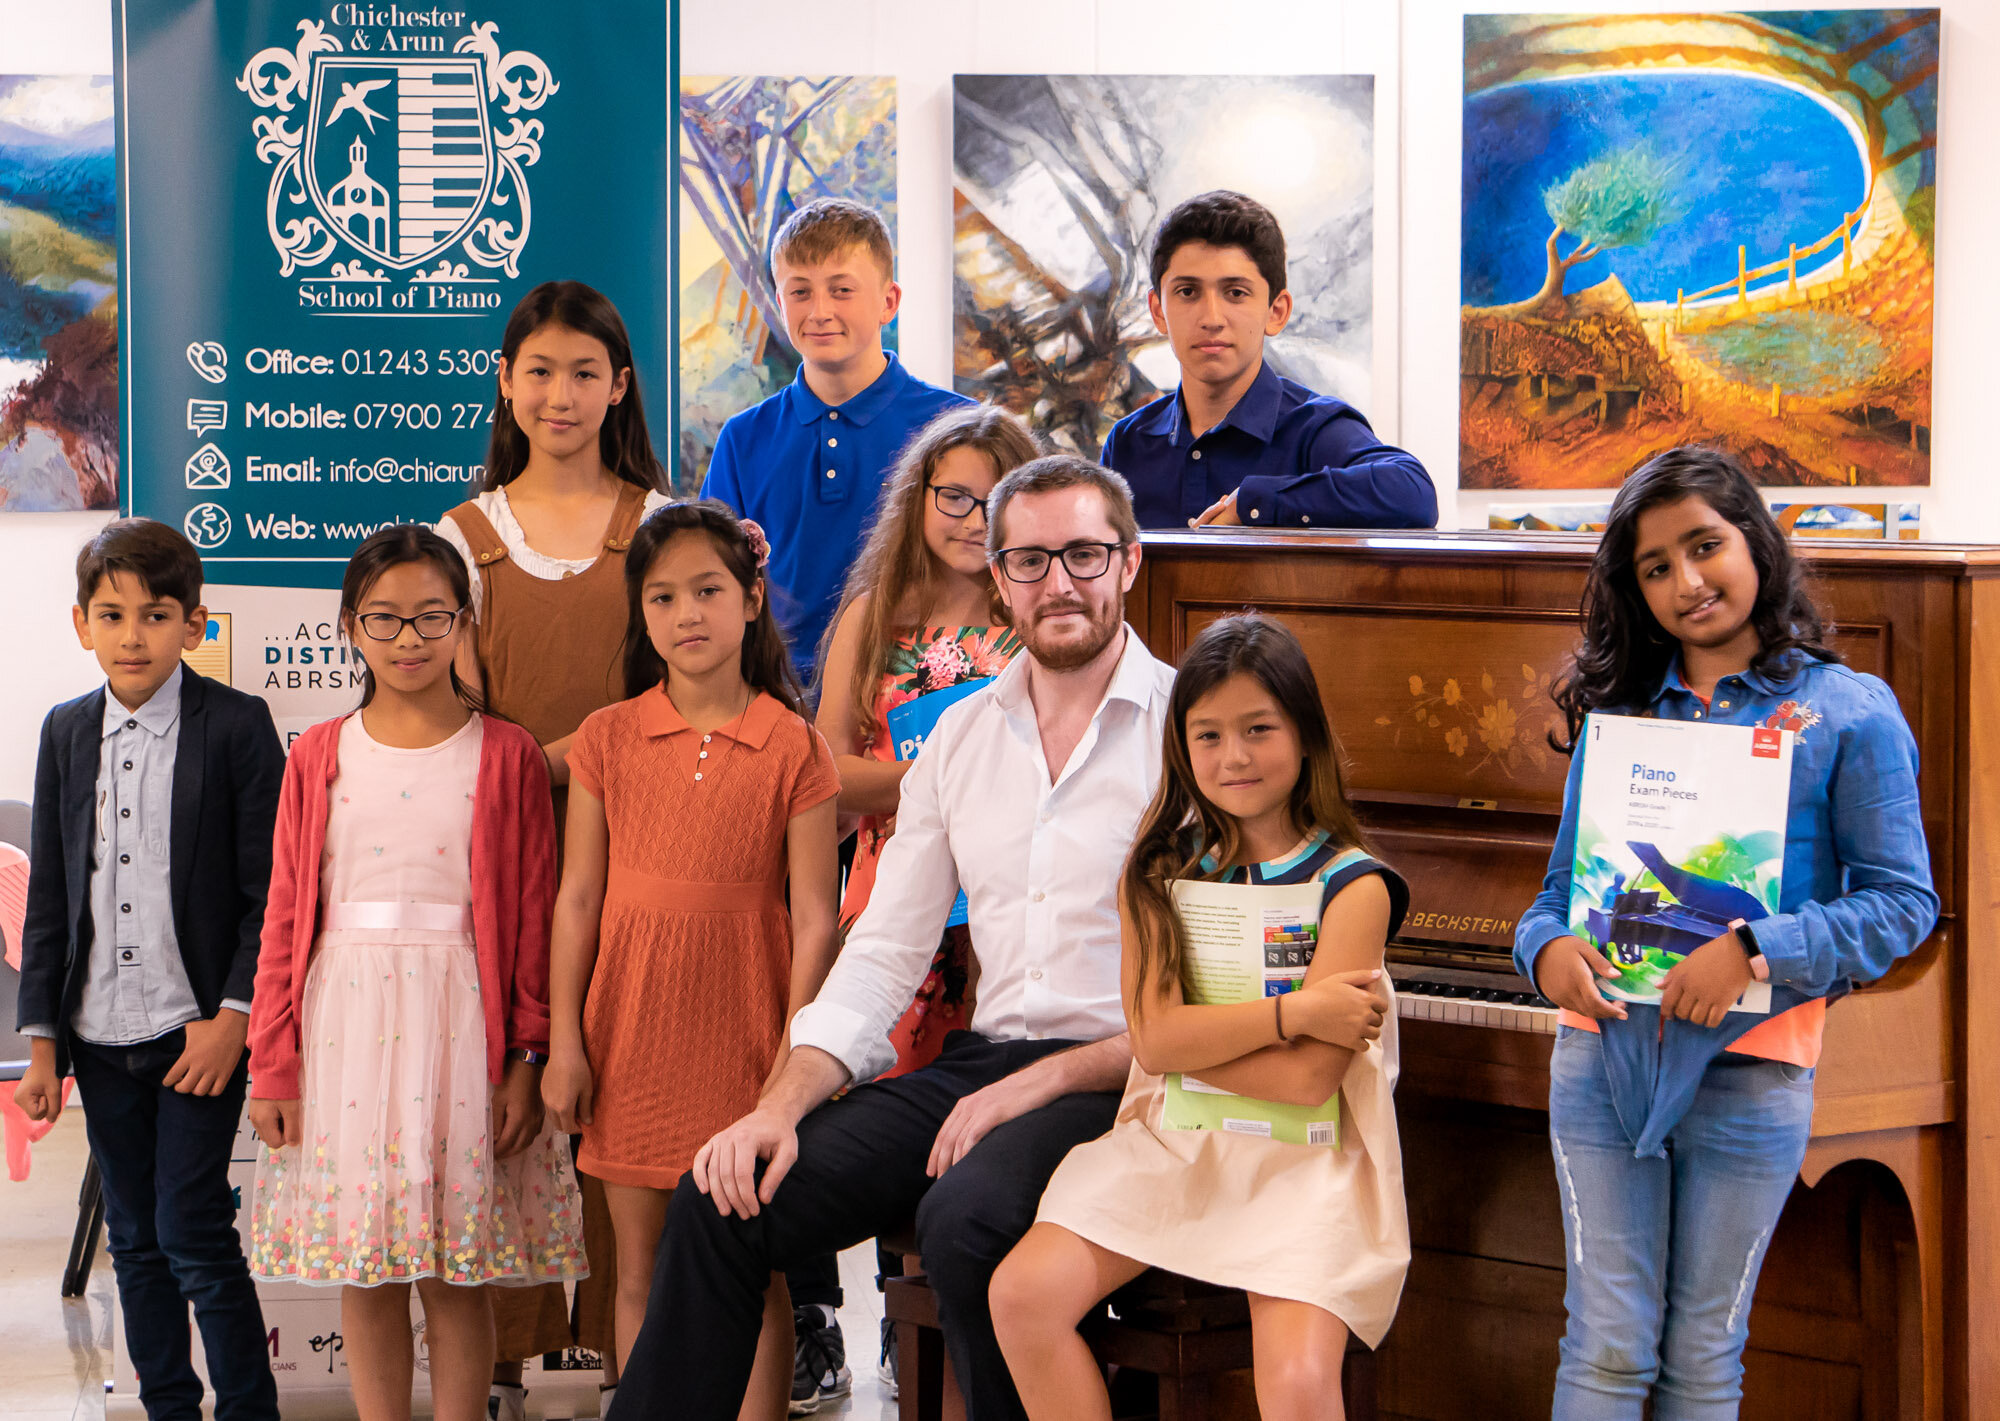   Welcome to Chichester &amp; Arun School of Piano   “Chris has a way with little ones and is very thorough and patient with teaching, as well as keeping his students interested and motivated!”   - Yassi, parent  